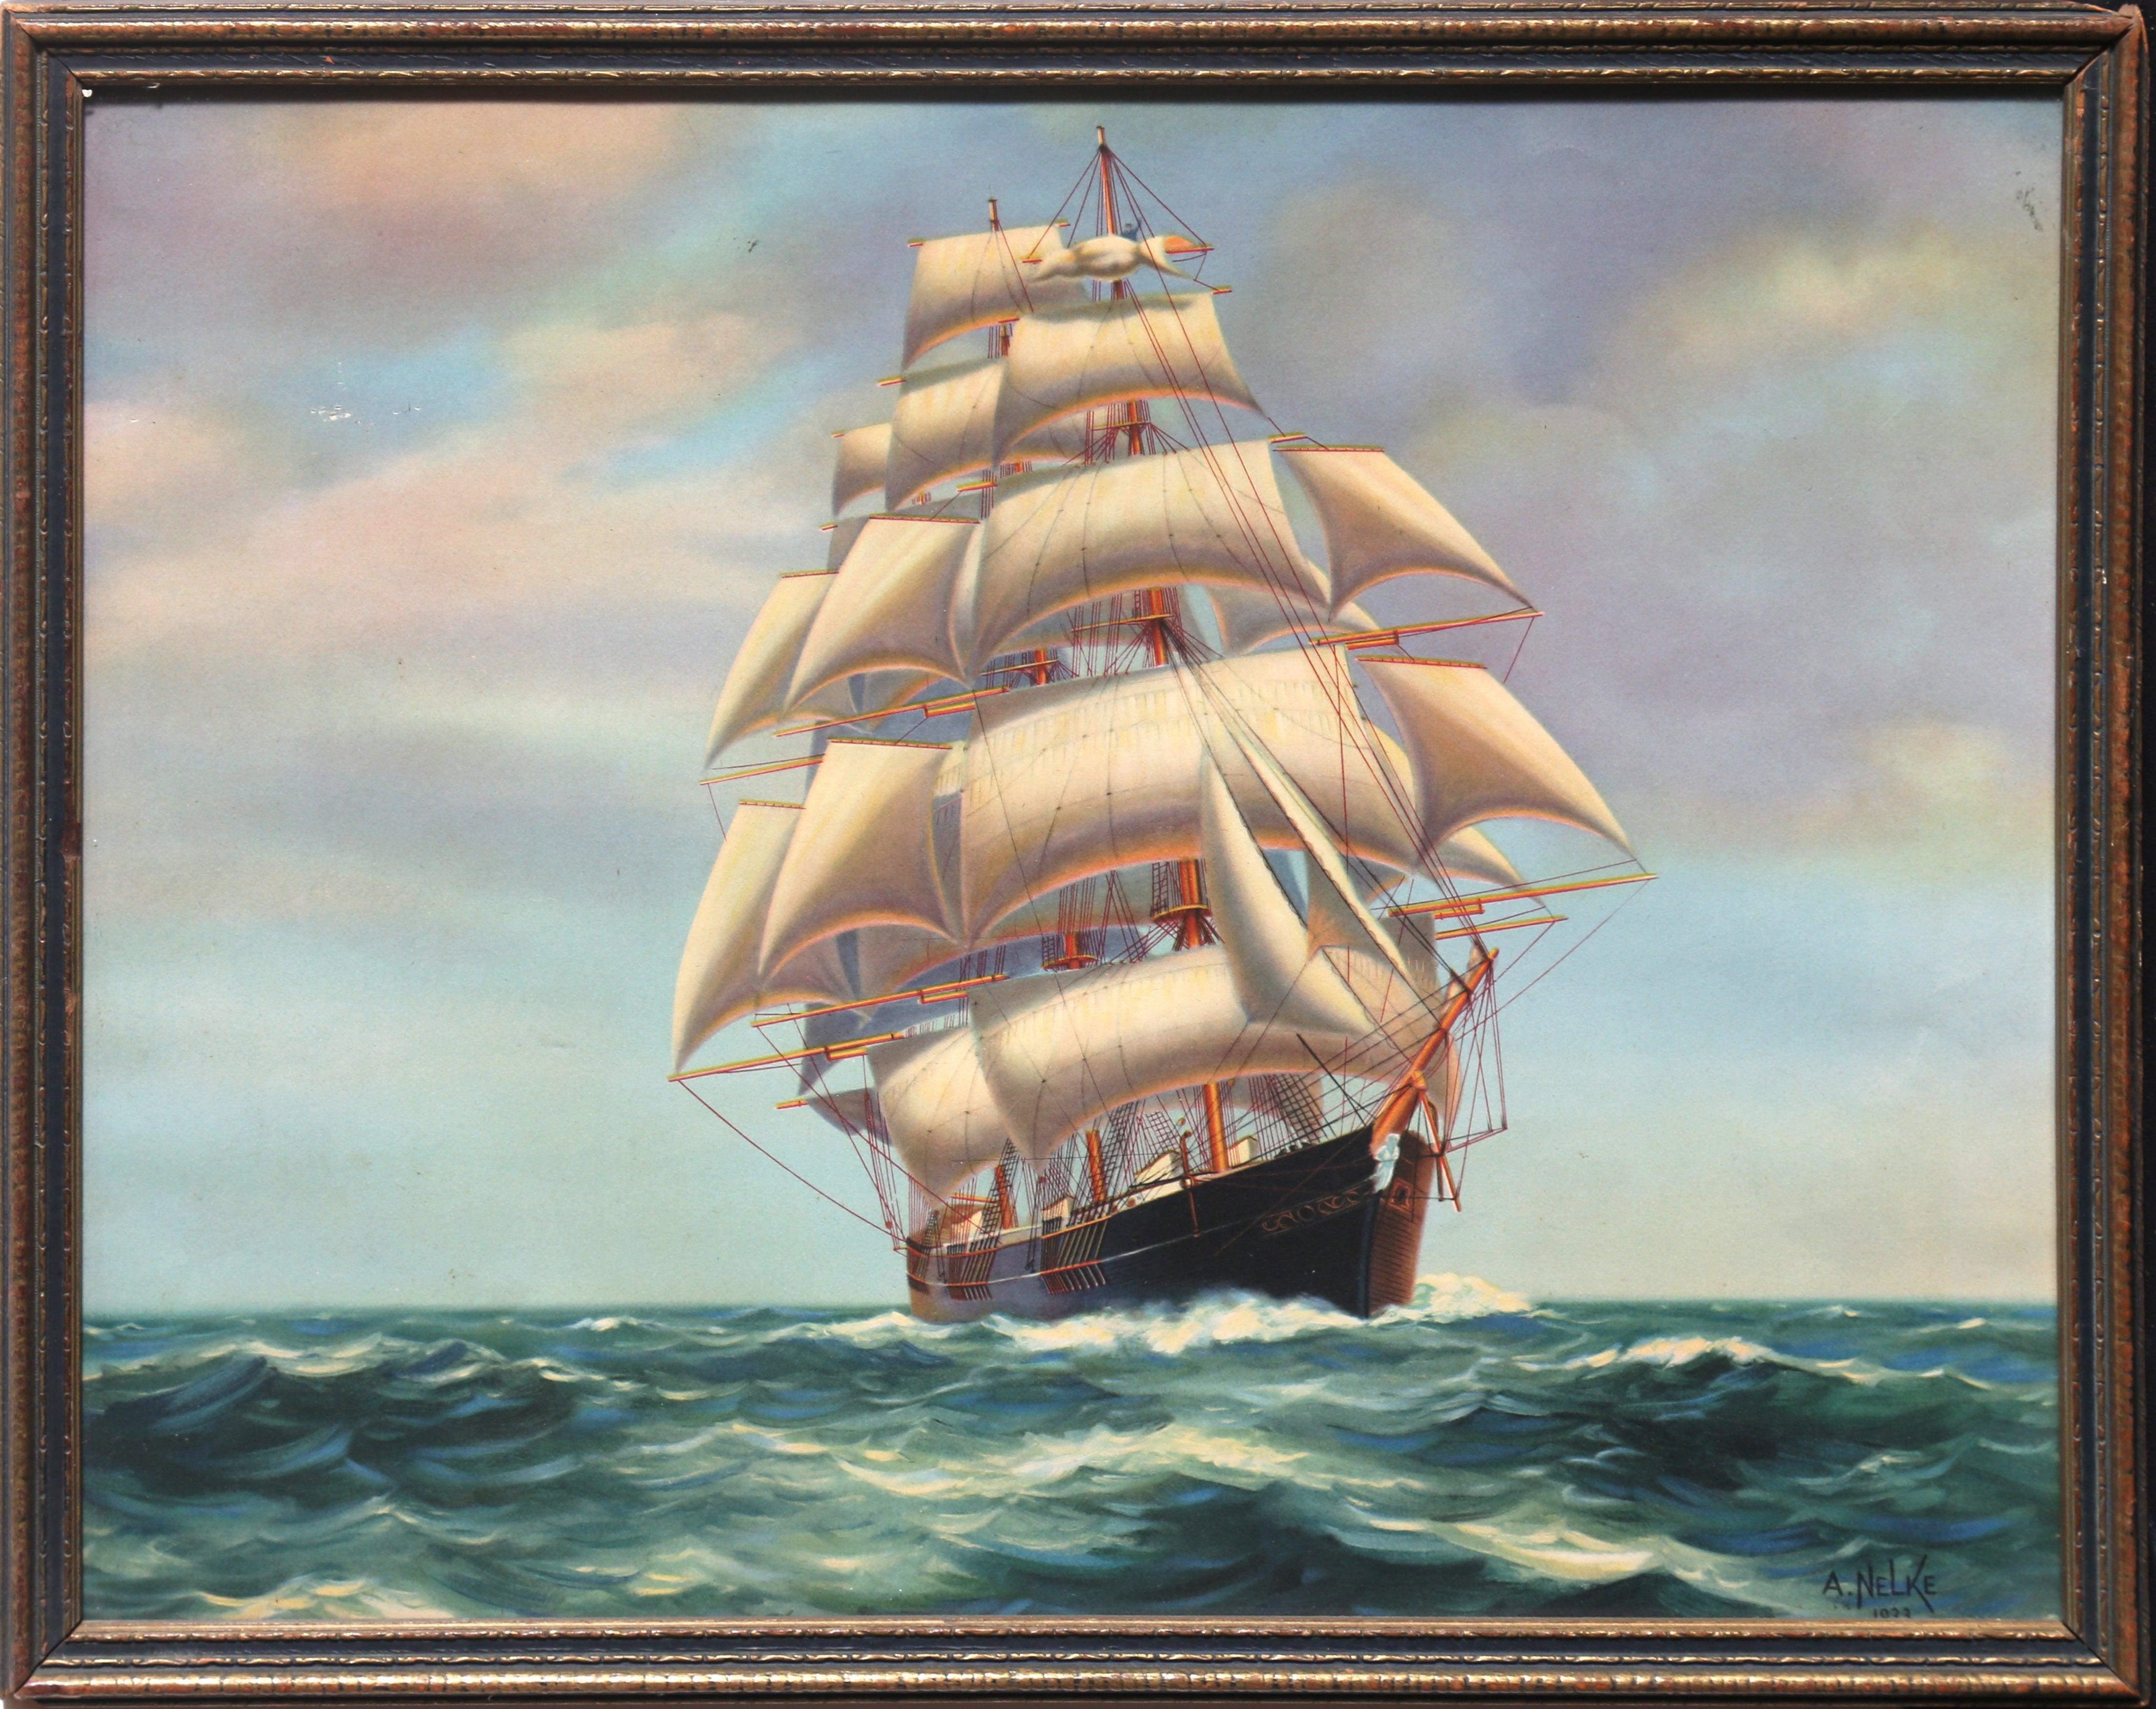 https://cdn.shopify.com/s/files/1/0054/5072/7489/products/yankee-clipper-ship-poster-or-sergei-alexander-nelkeproduct-type.jpg?v=1676779874